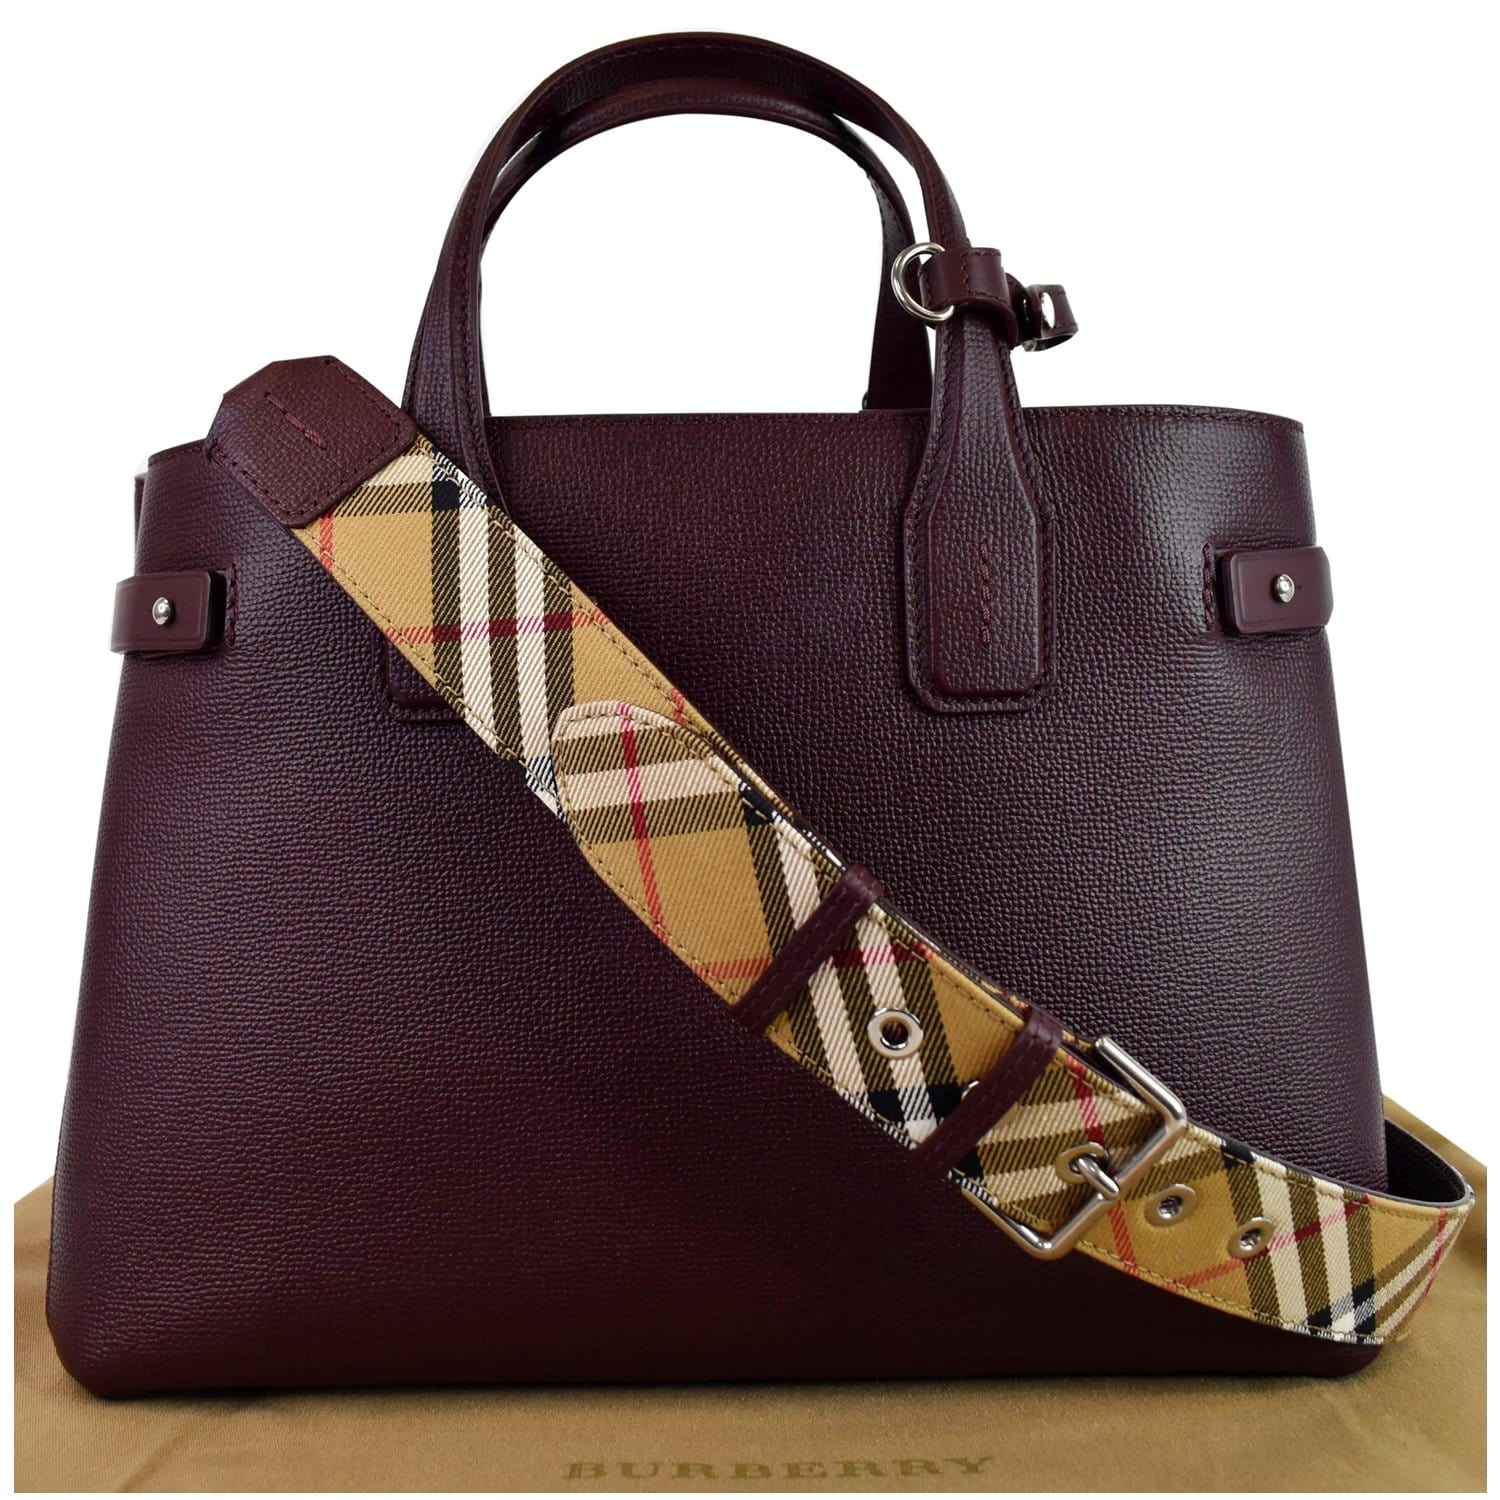 AUTH BURBERRY BANNER CAMEL BROWN LEATHER CHECKED SHOULDER CROSS TOTE BAG